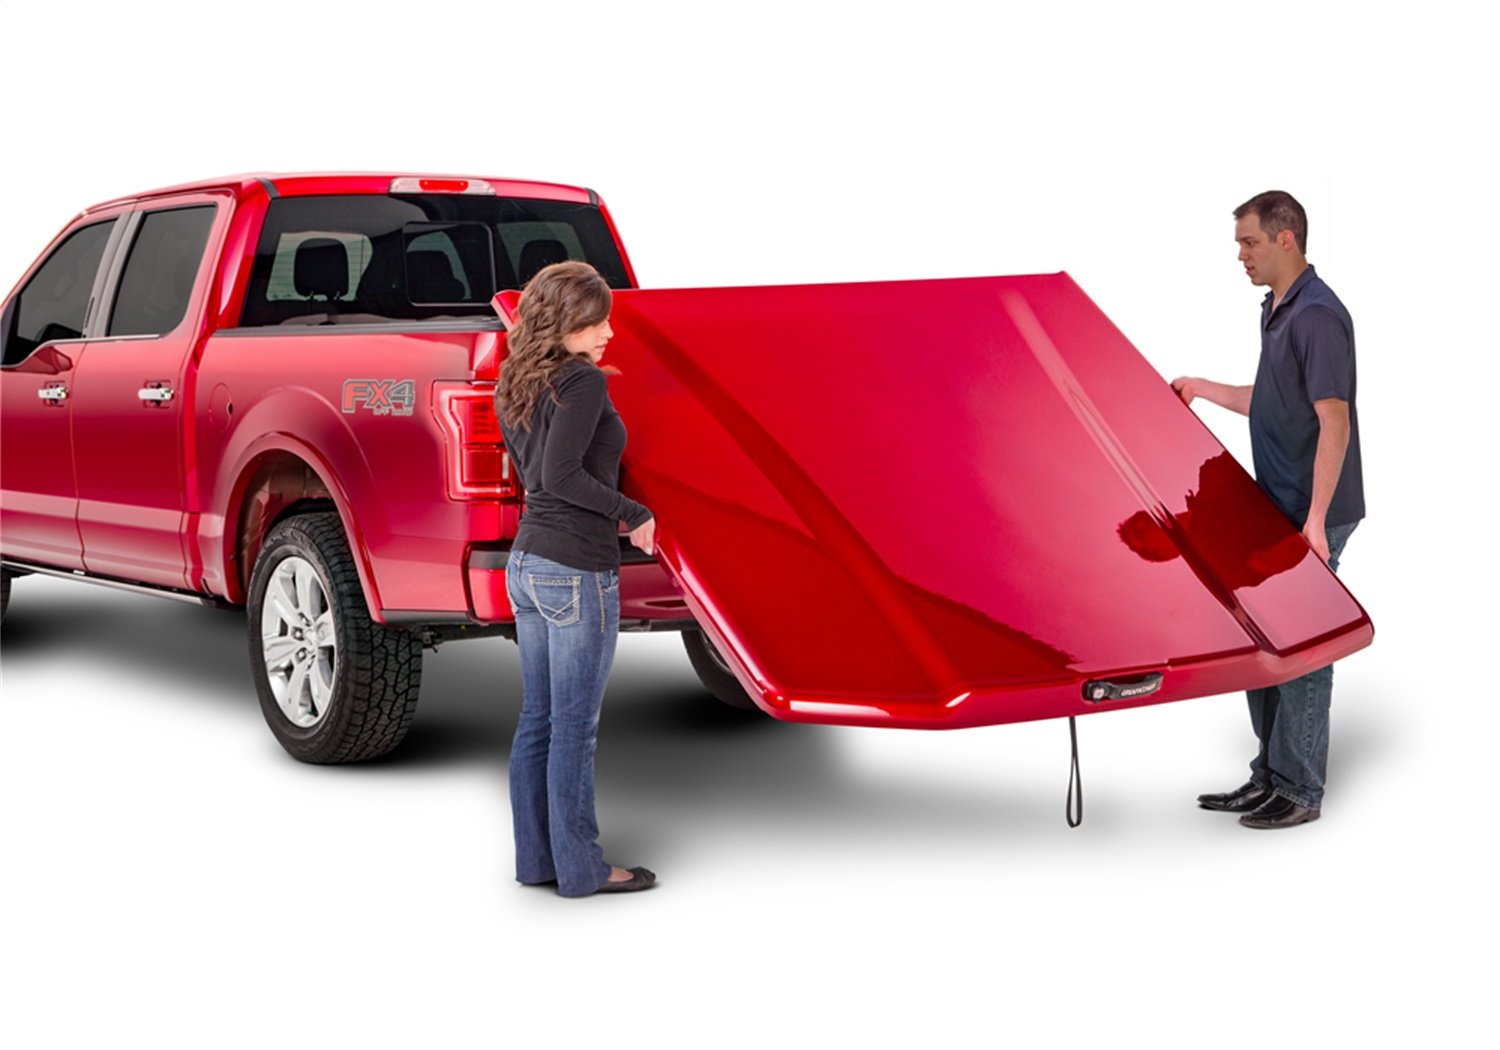 UC2188L-G1 Elite LX Hard Non-Folding Cover, Fits Select Ford Ranger 5'Bed, G1 Shadow Black